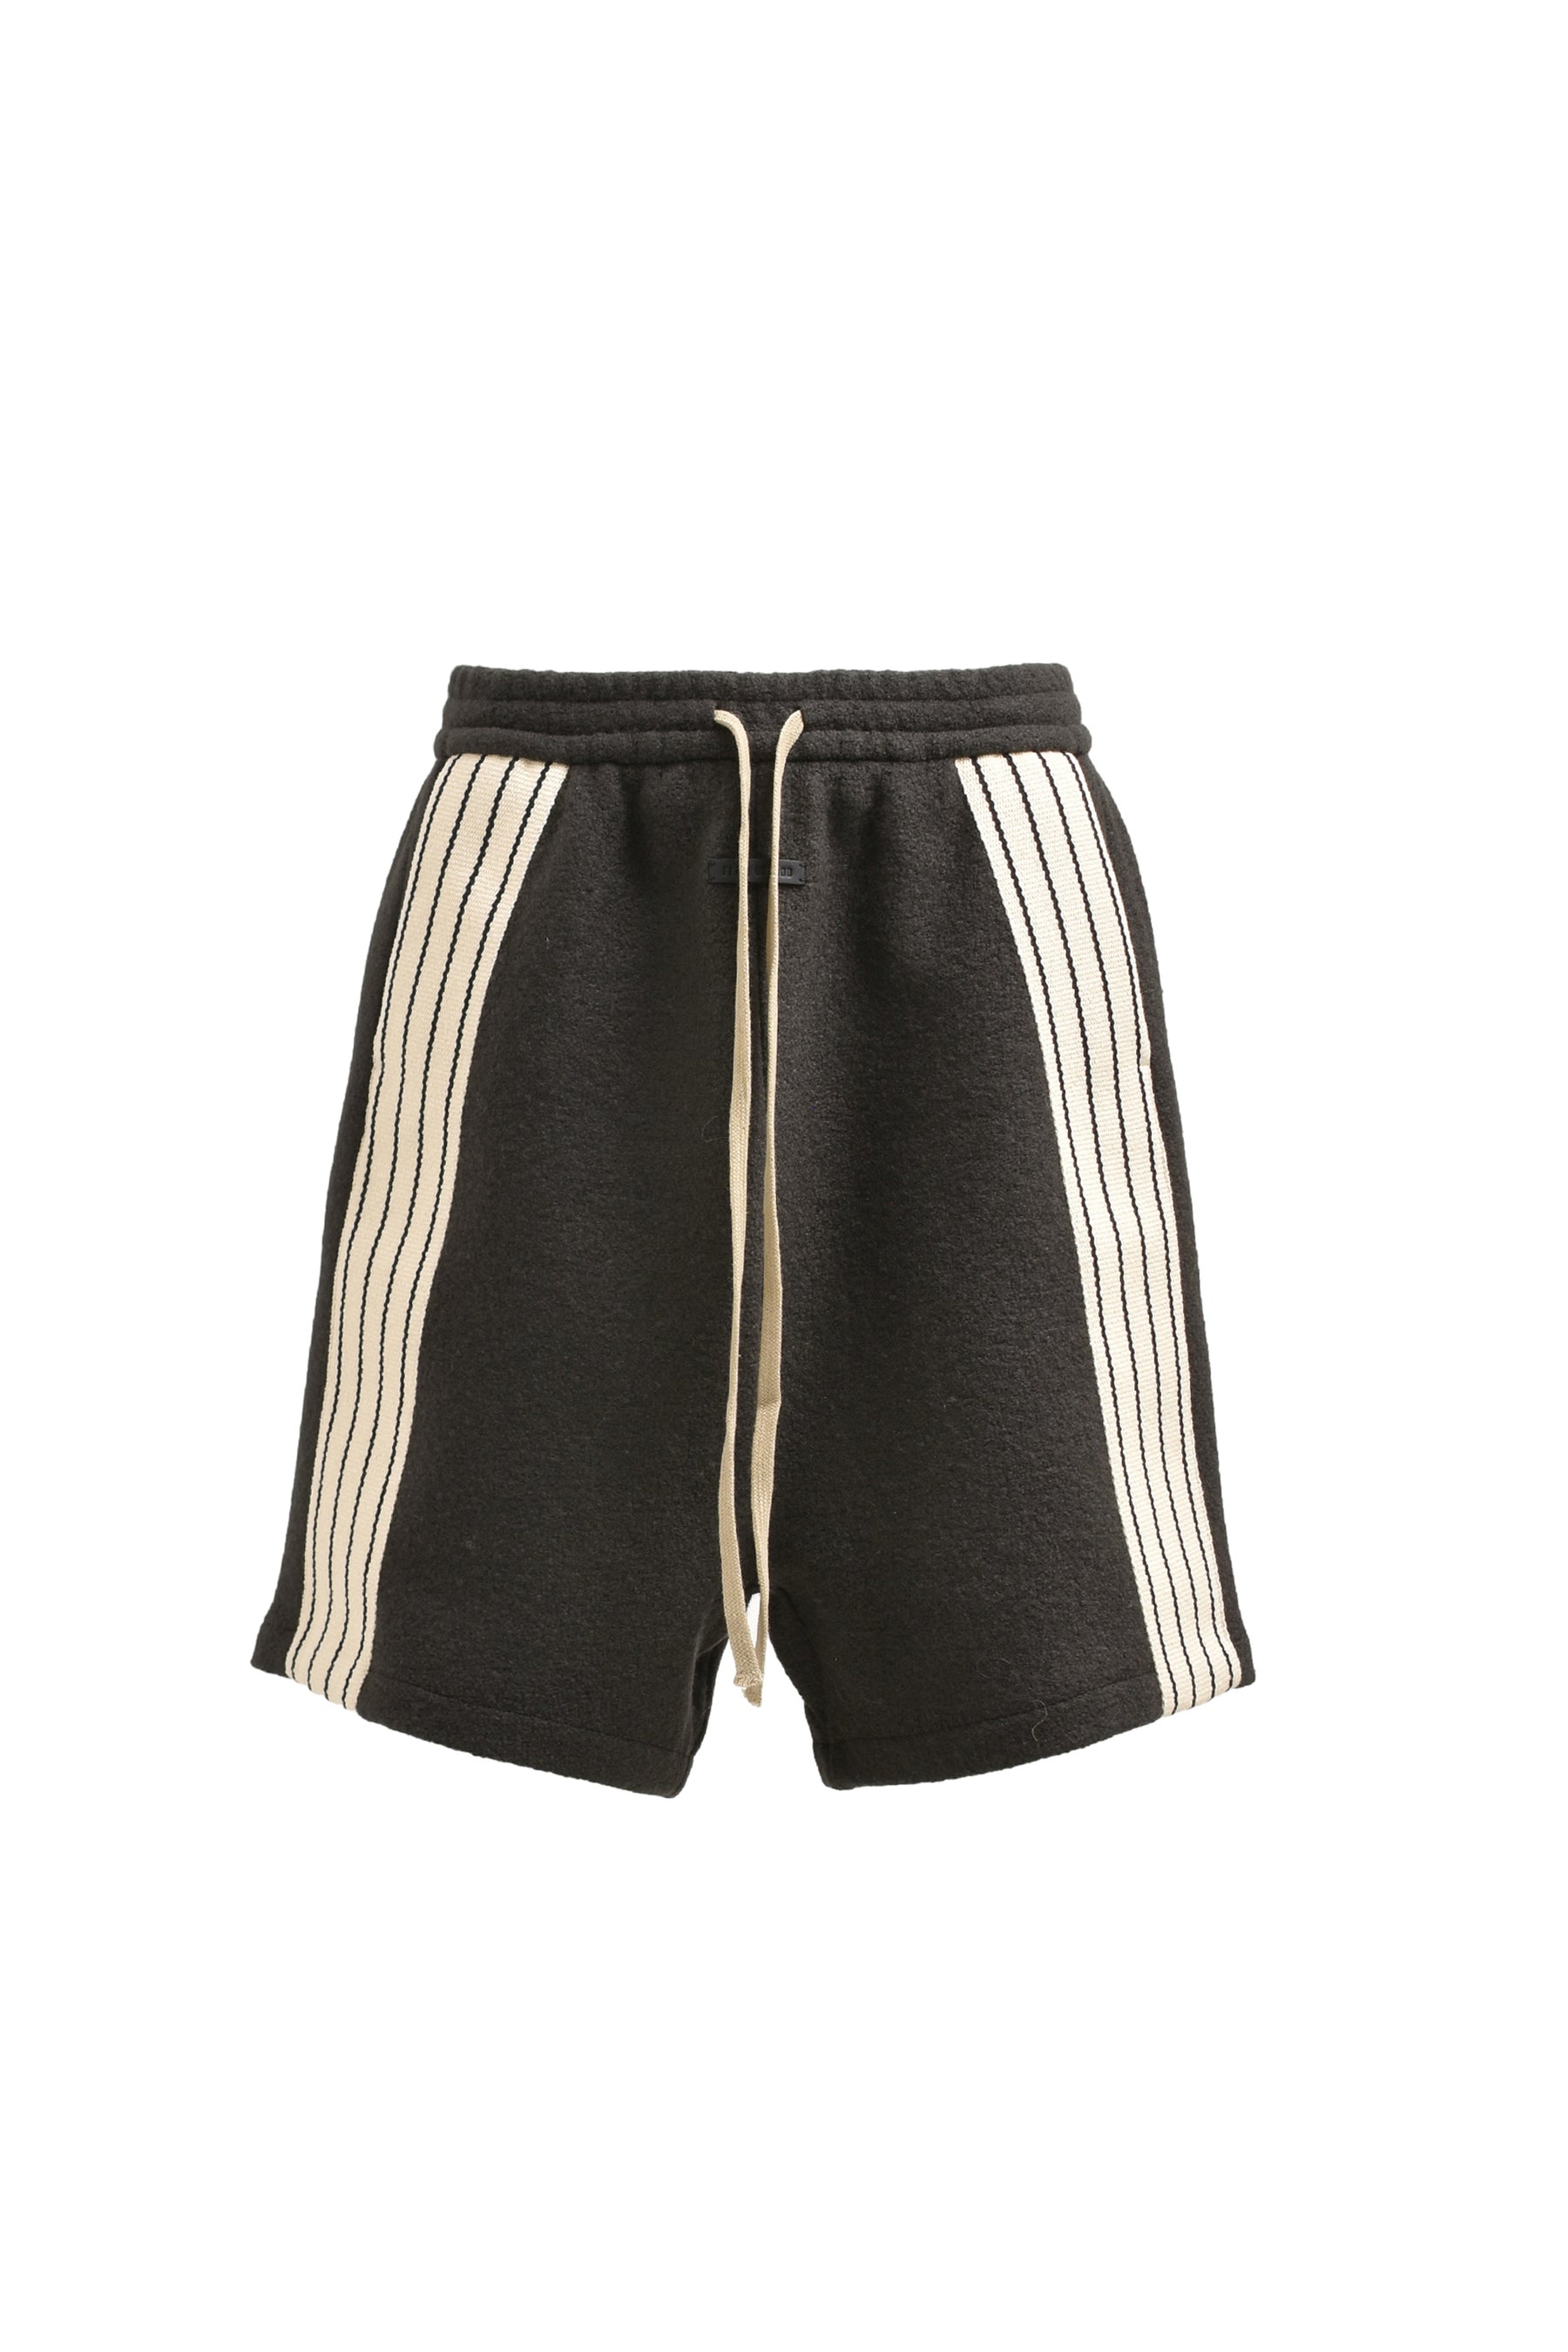 SIDE STRIPE RELAXED SHORT / FOREST